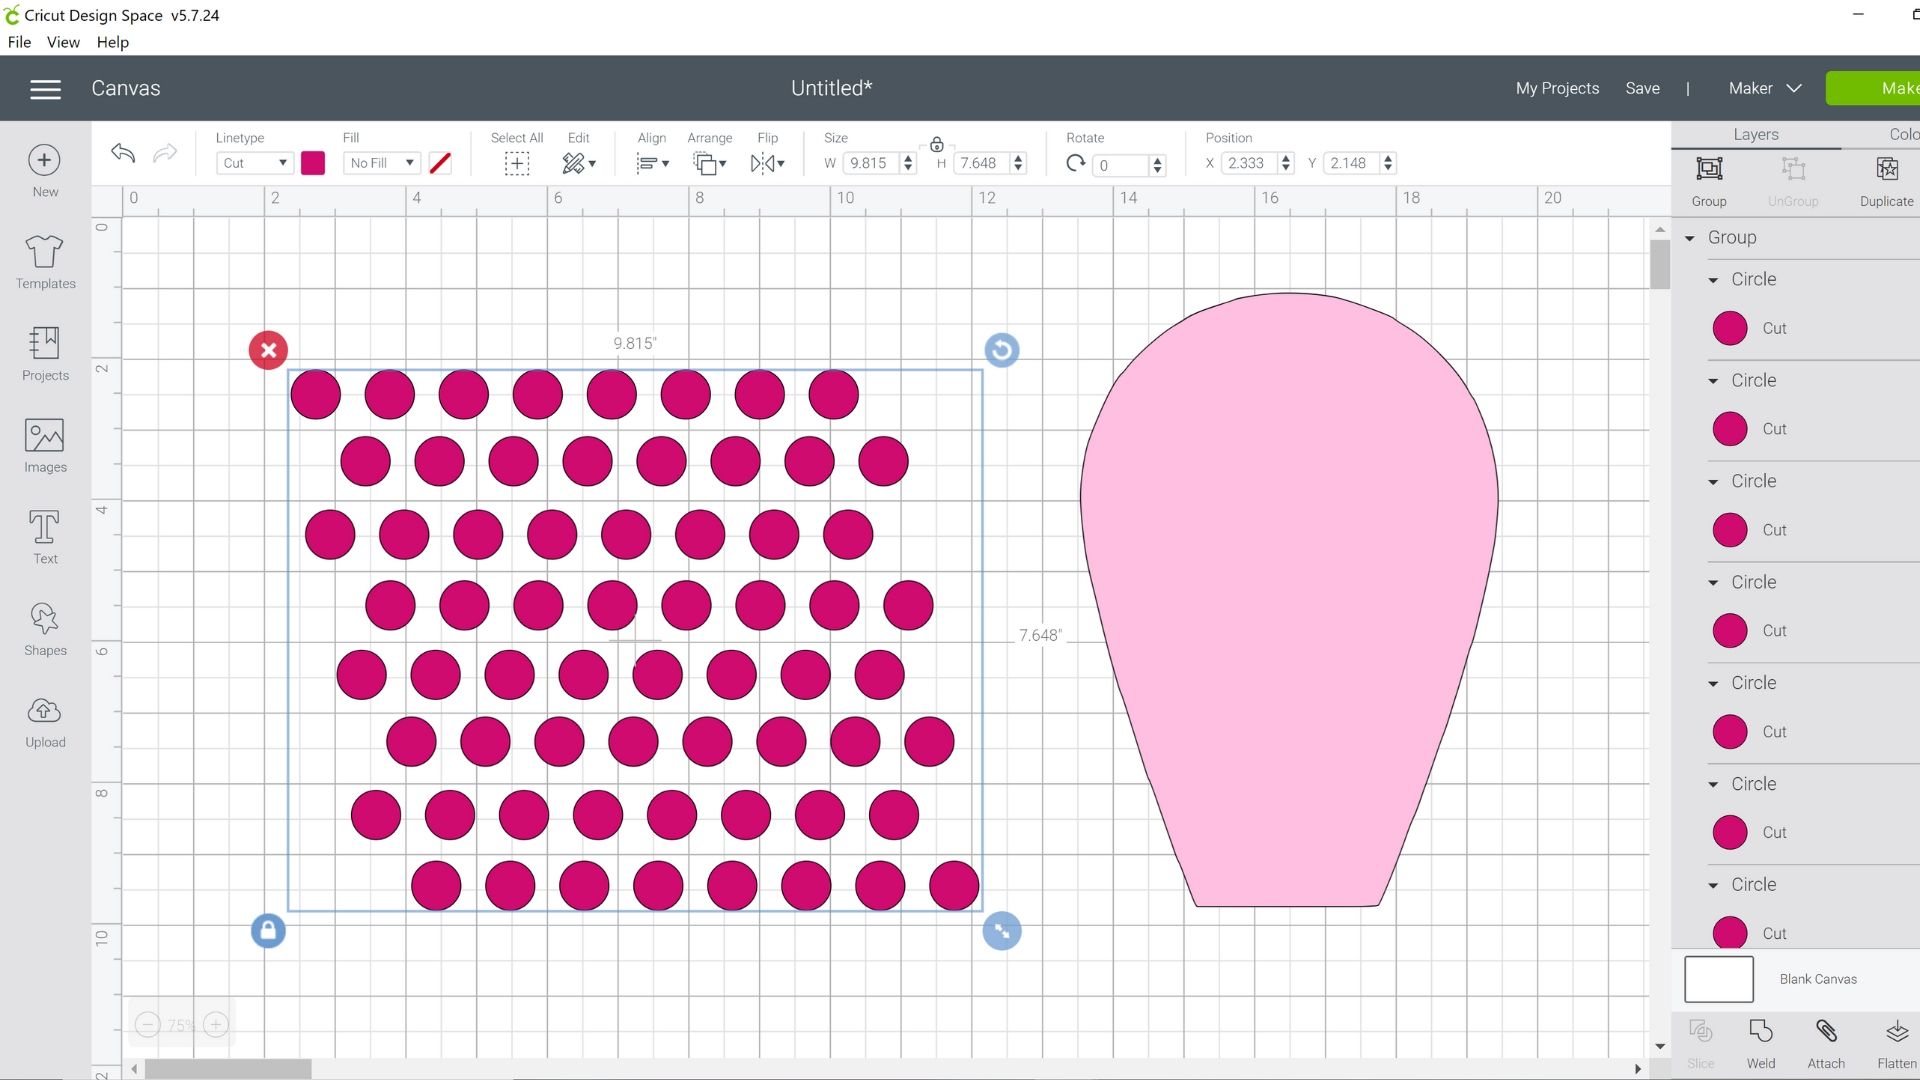 A screenshot of Design Space canvas with a group of pink polka dots selected, next to a larger light pink flower petal.